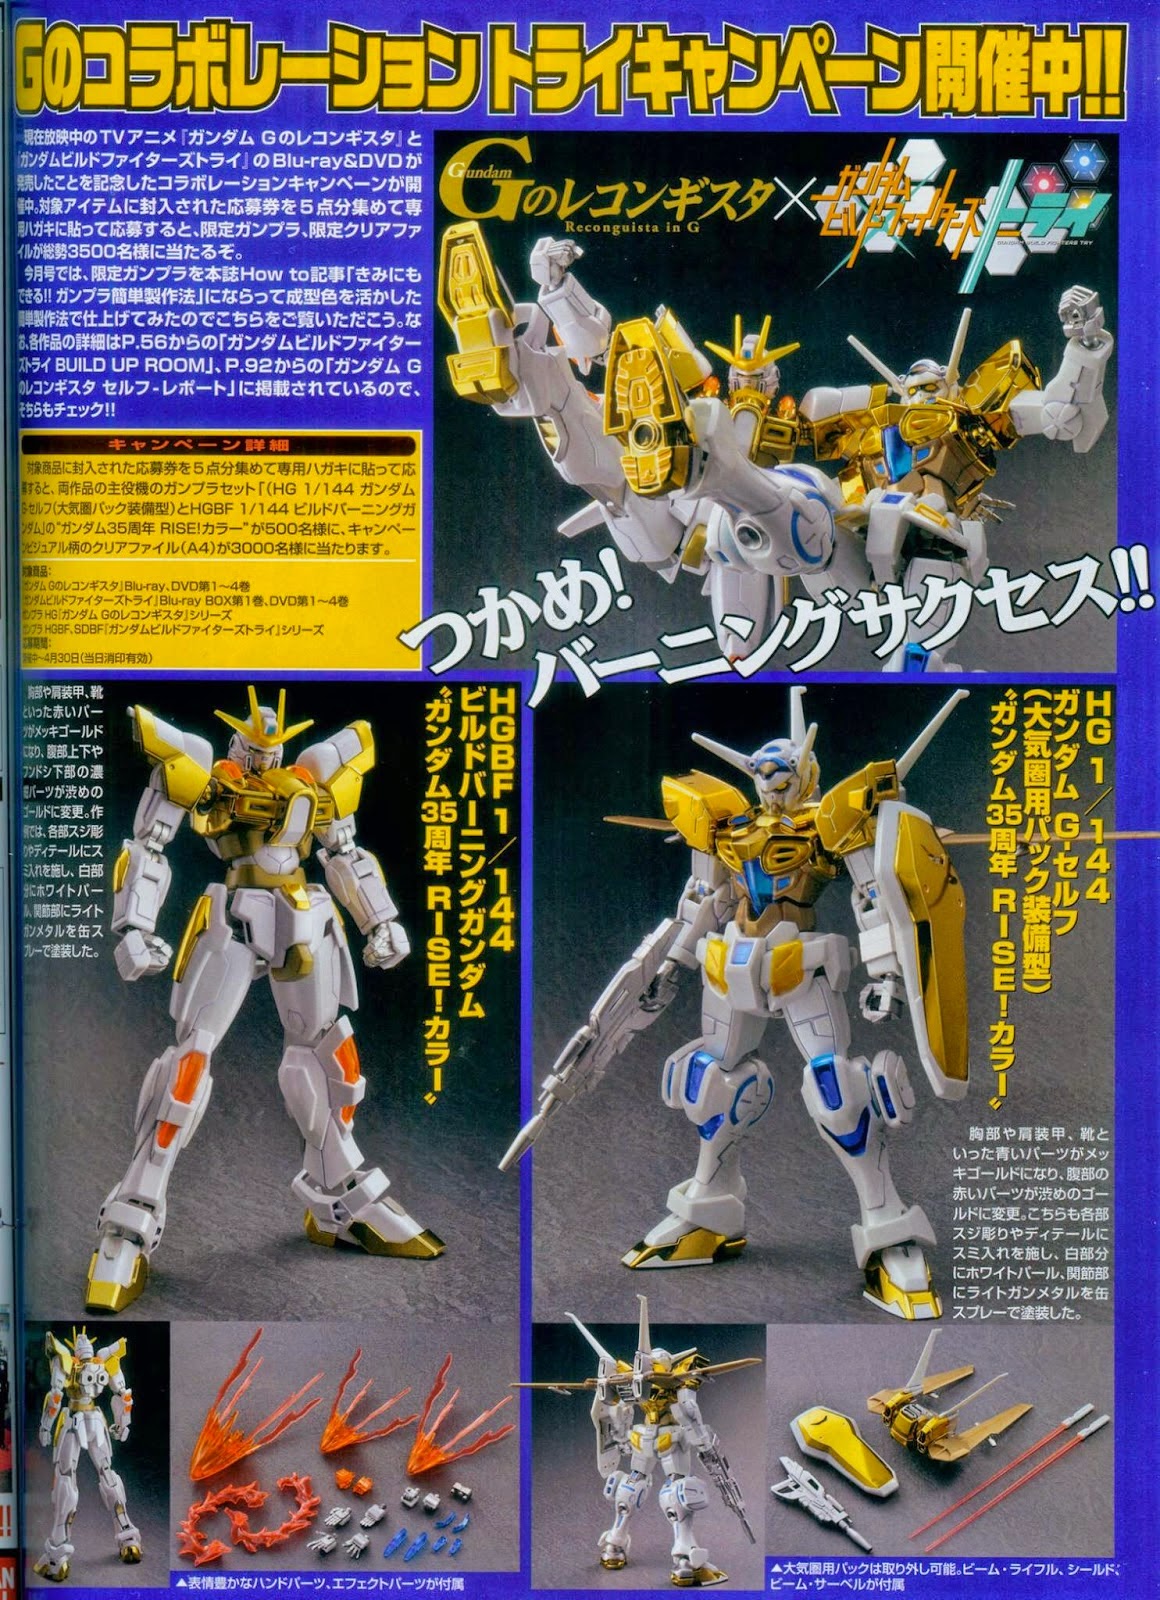 G リミテッド Campaign Gundam 35th Anniversary Rise Color Gundam Set Collaboration In G Limited Edition Gundam Model Kits And Figures